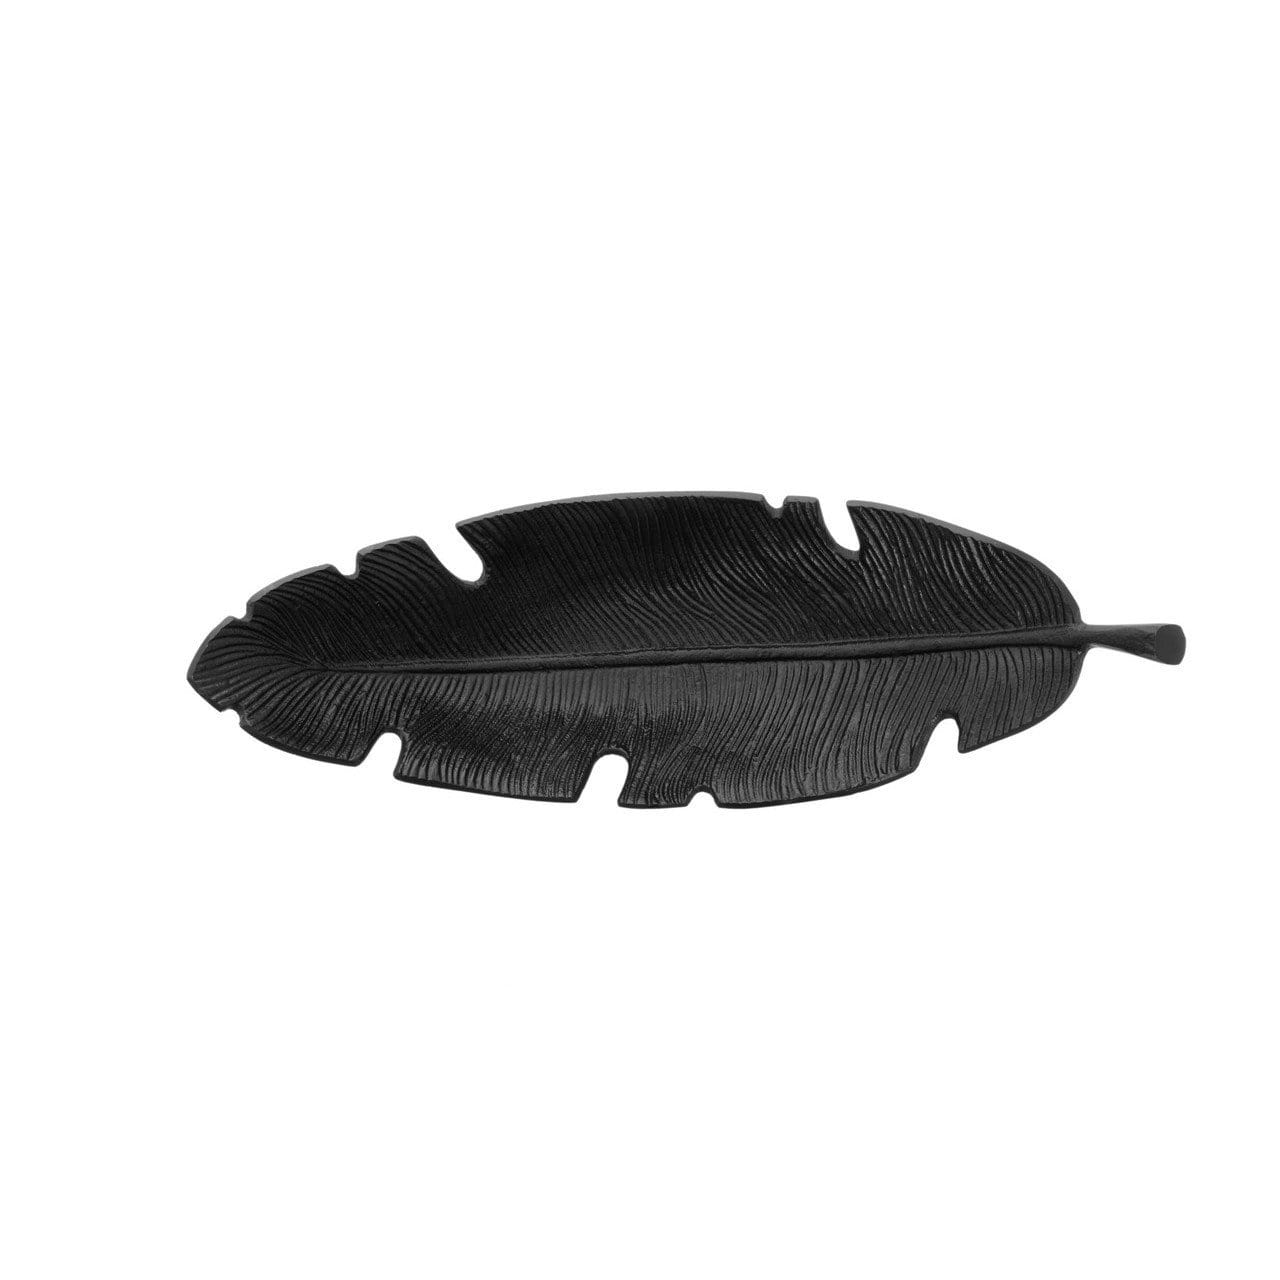 Noosa & Co. Accessories Flos Black Finish Curved Leaf Dish House of Isabella UK